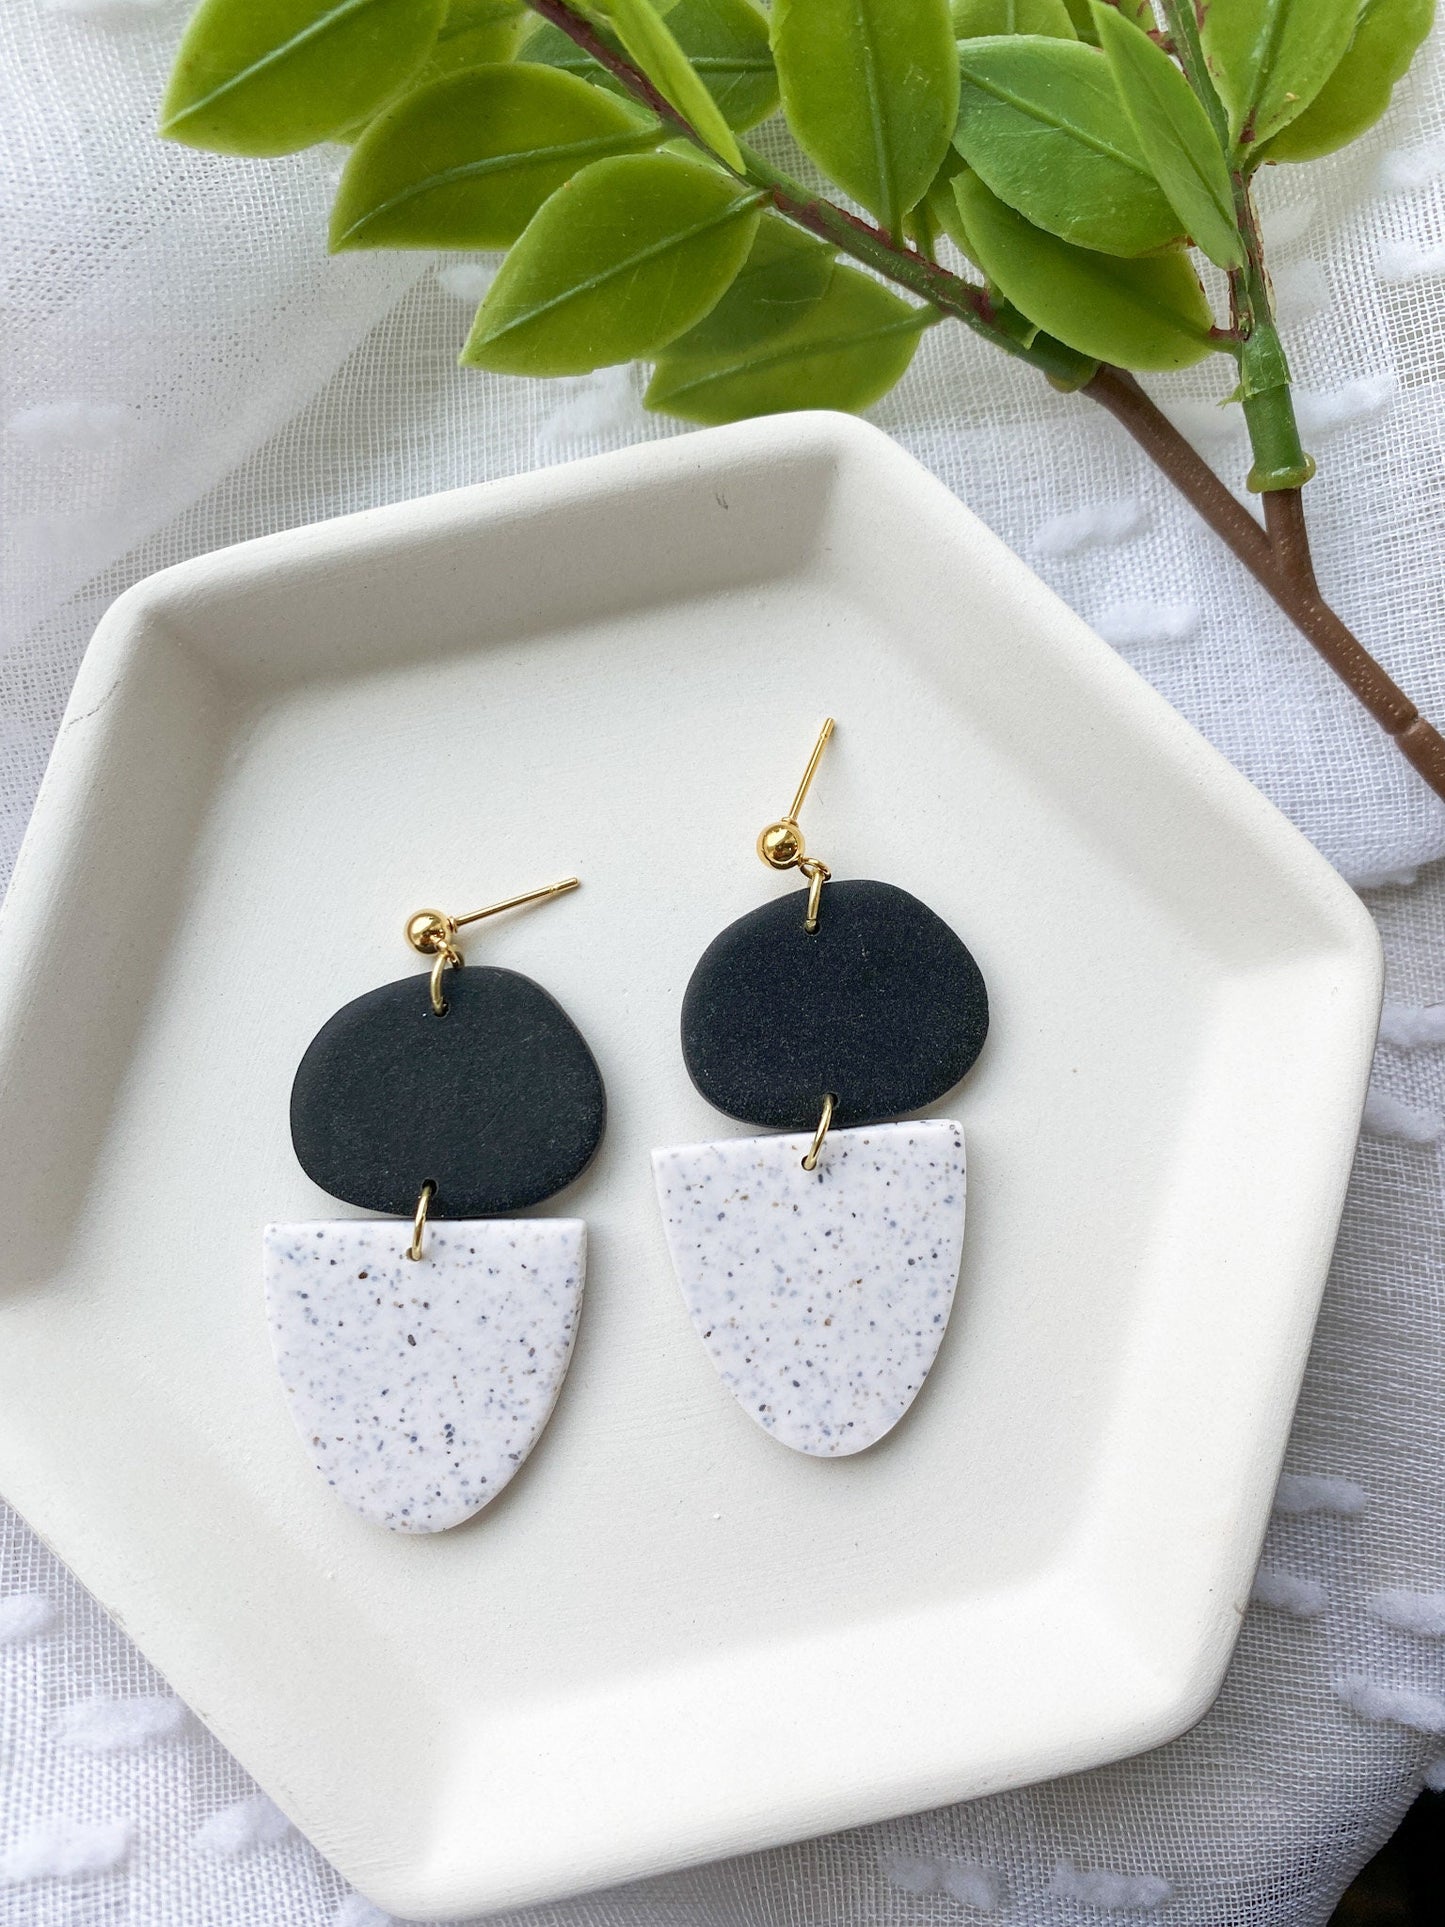 Speckled White and Black Fancy Dangle Earrings |  Polymer Clay | 18kt Gold Plated Ball Posts | Fancy Earrings | Everyday Wear | Neutral